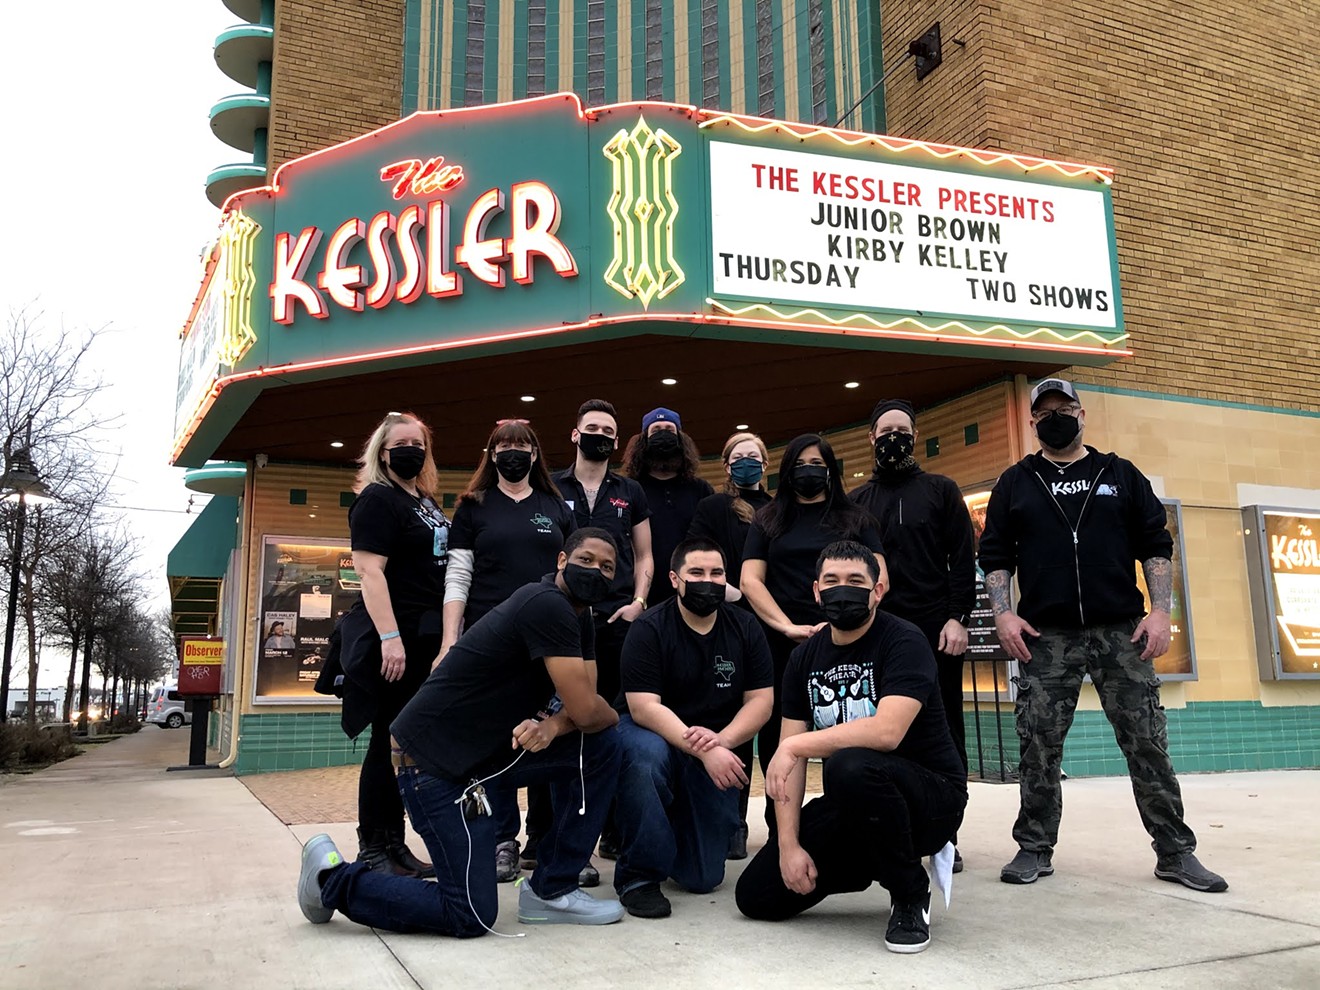 Employees at The Kessler are wearing double masks and will continue to do so until the CDC says otherwise.